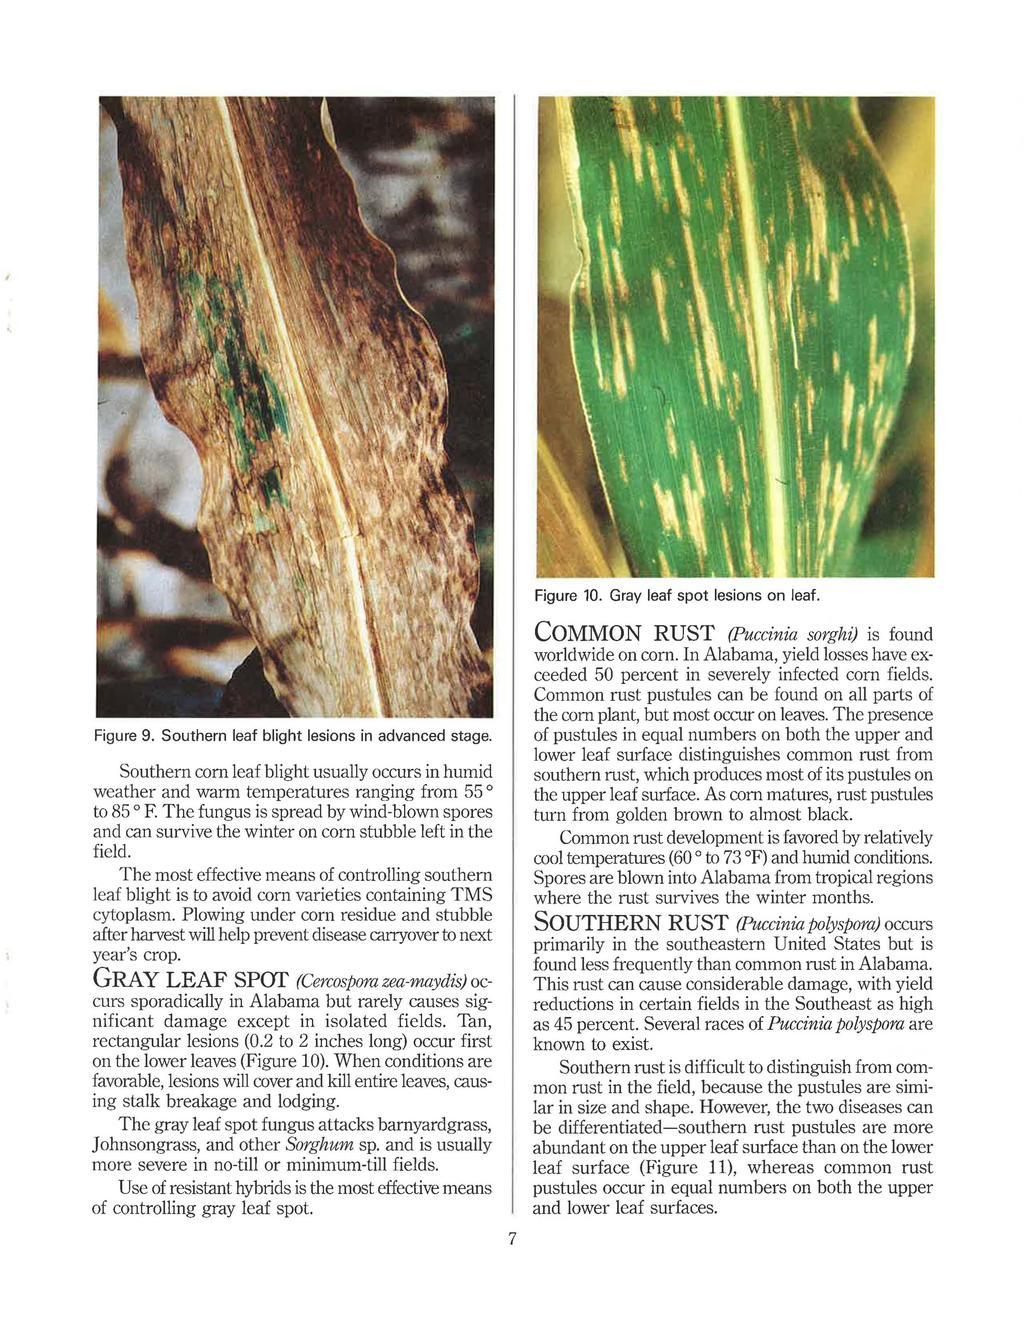 Figure 9. Southern leaf blight lesions in advanced stage. Southern corn leaf blight usually occurs in humid weather and warm temperatures ranging from 55 a to 85 a F.